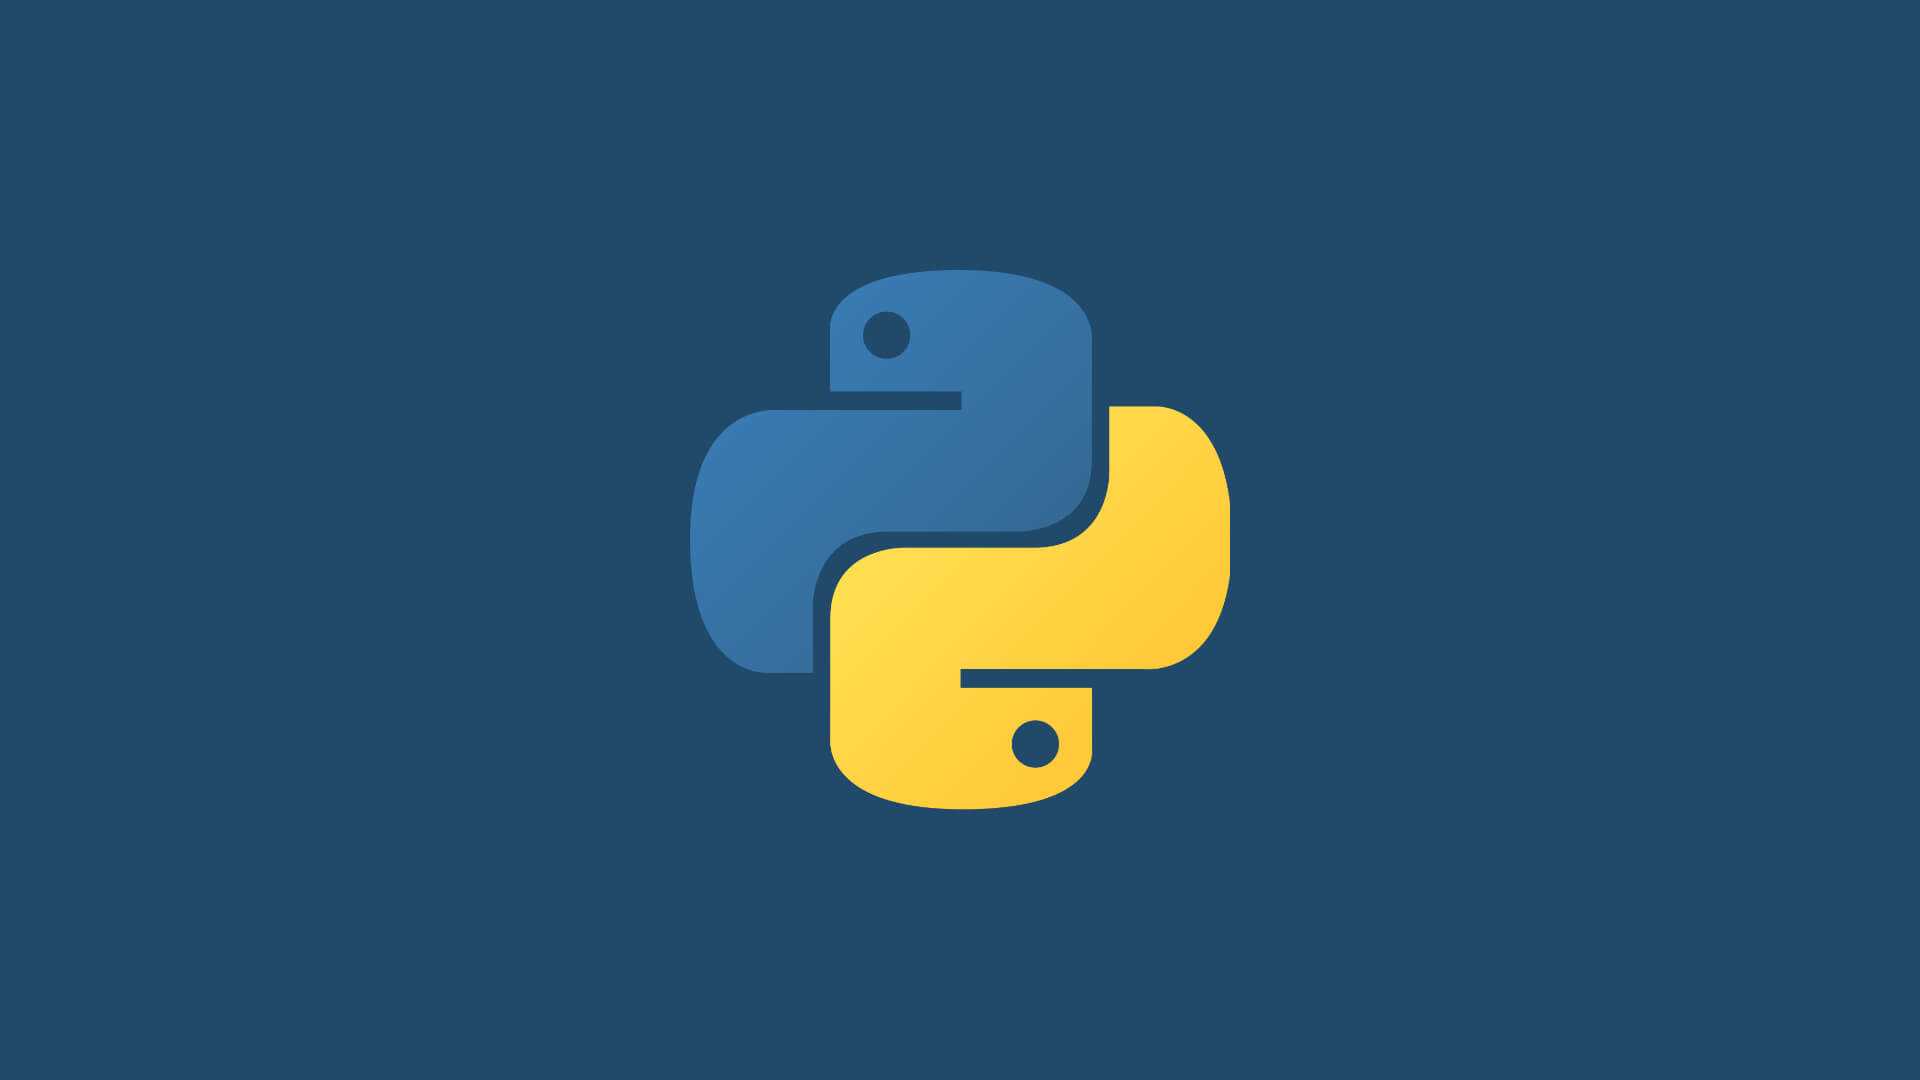 Python Package Managers, Ecossistema, Pipenv e Poetry